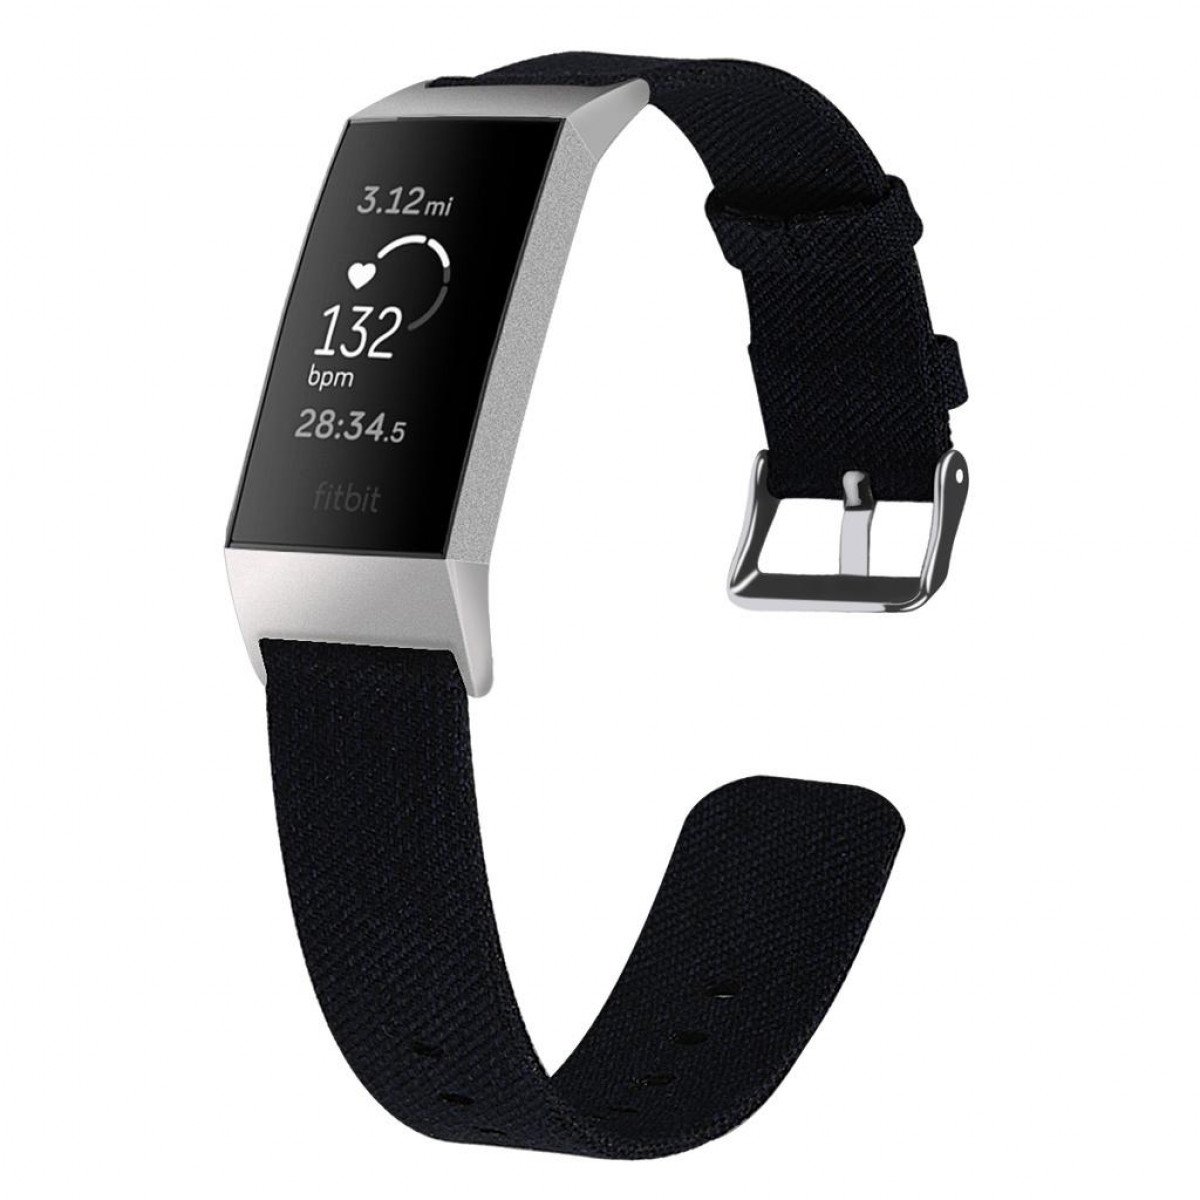 3/4 Charge Schwarz Fitbit Armband Charge 3/ Schwarz Ersatzband, 4, Charge INF (S), Canvas Fitbit,